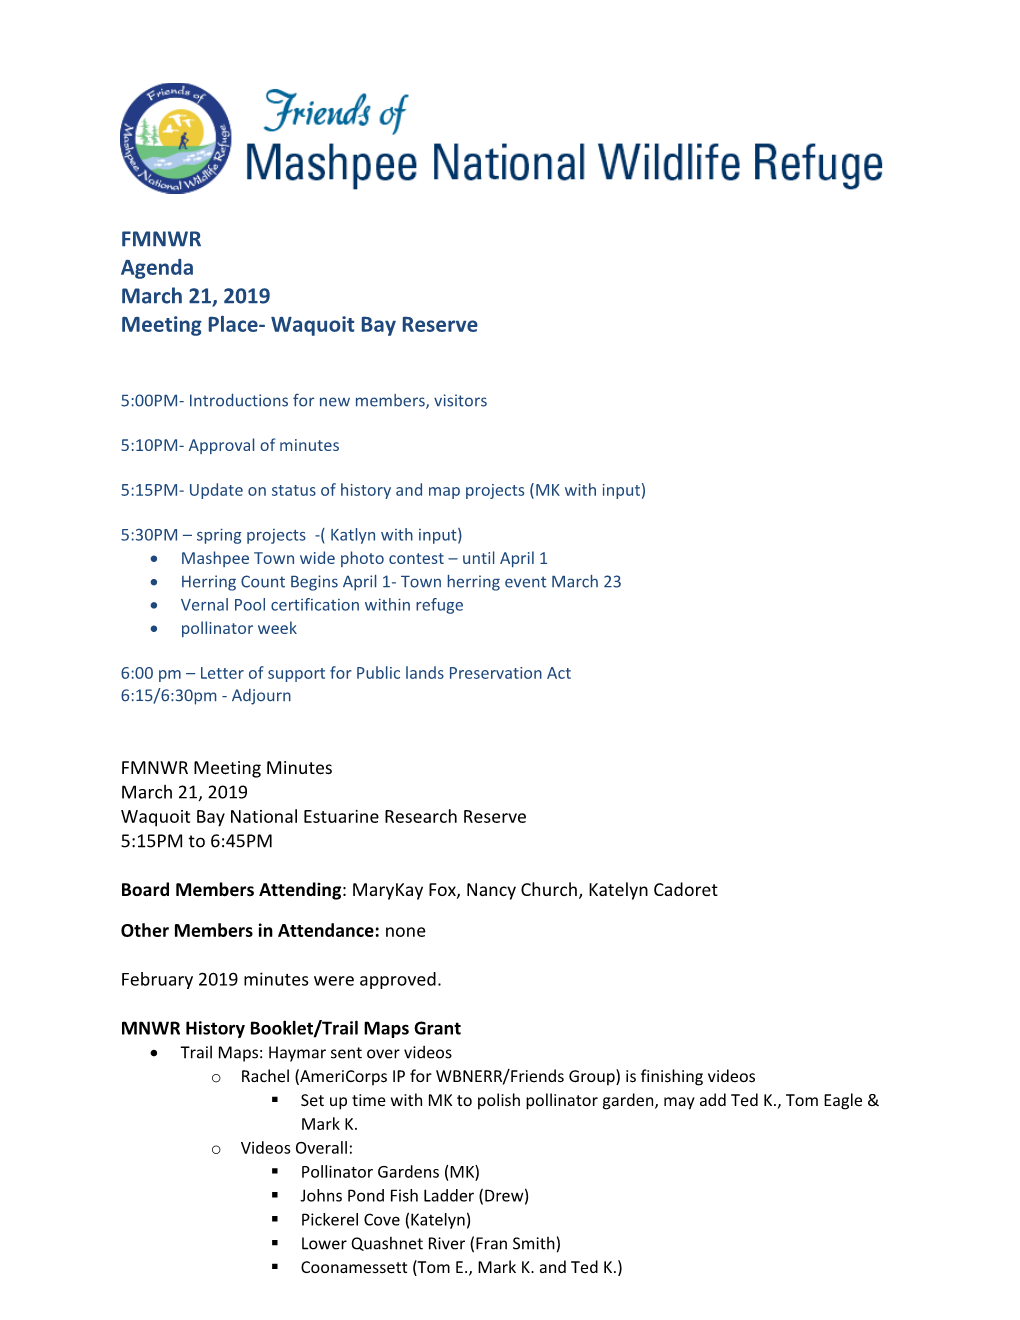 FMNWR Agenda March 21, 2019 Meeting Place- Waquoit Bay Reserve